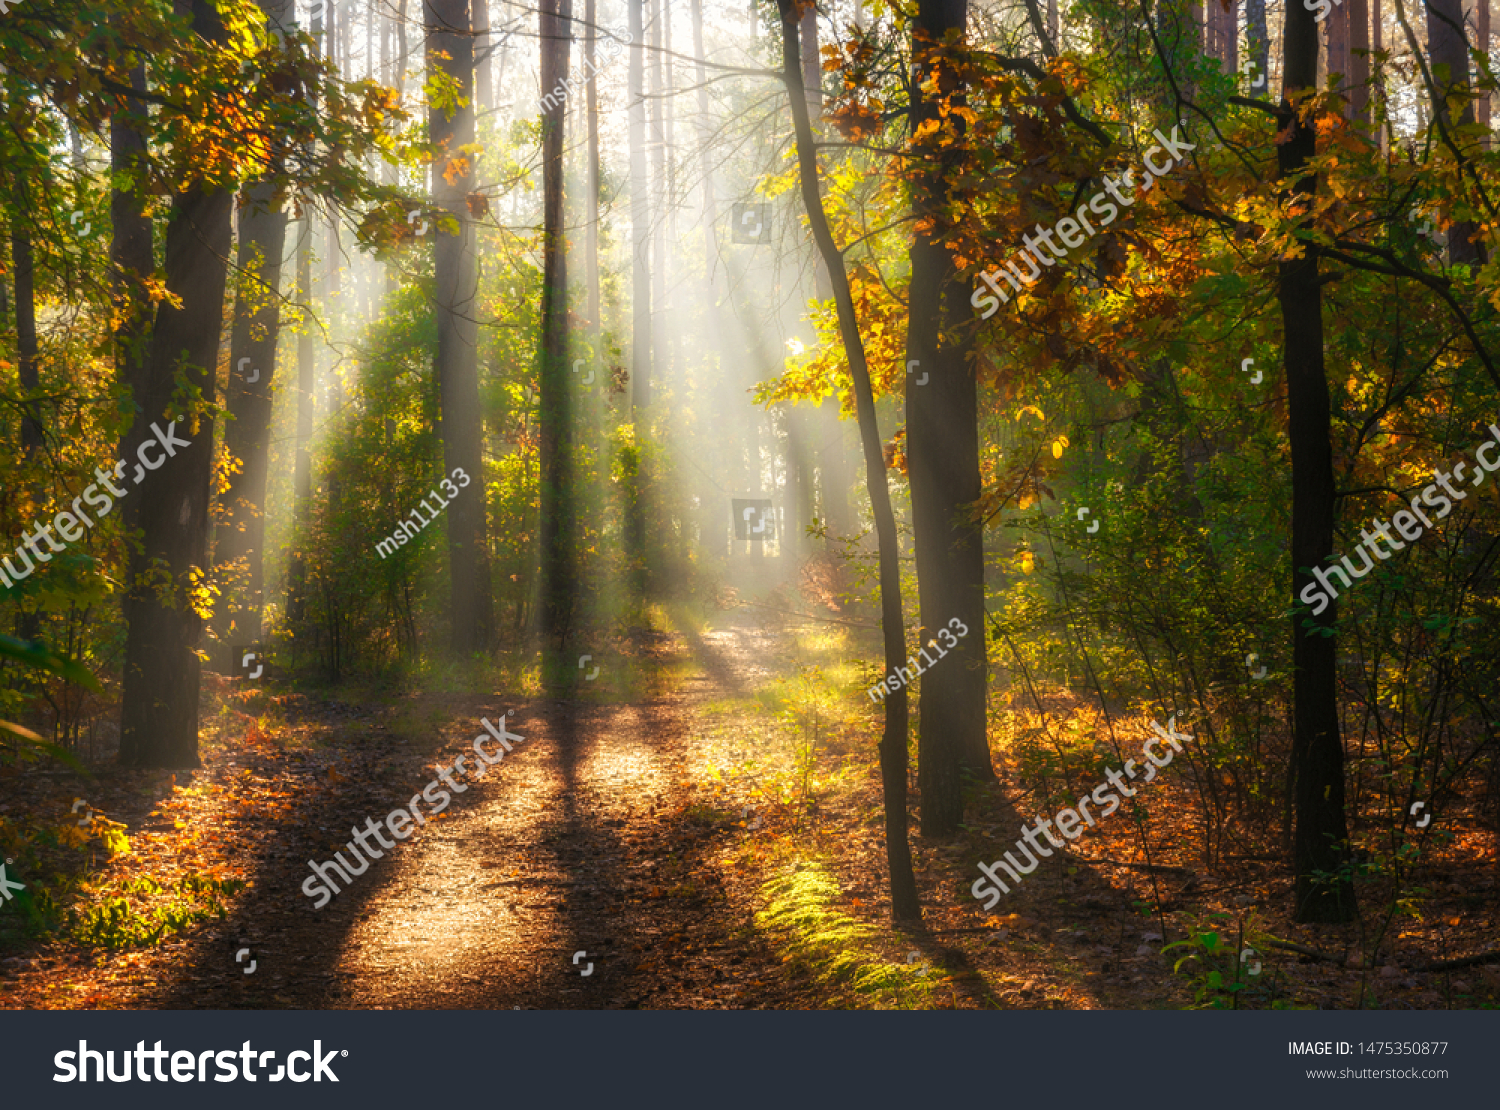 Walk in the woods. Pleasant autumn weather. Sun rays play in the branches of trees. #1475350877